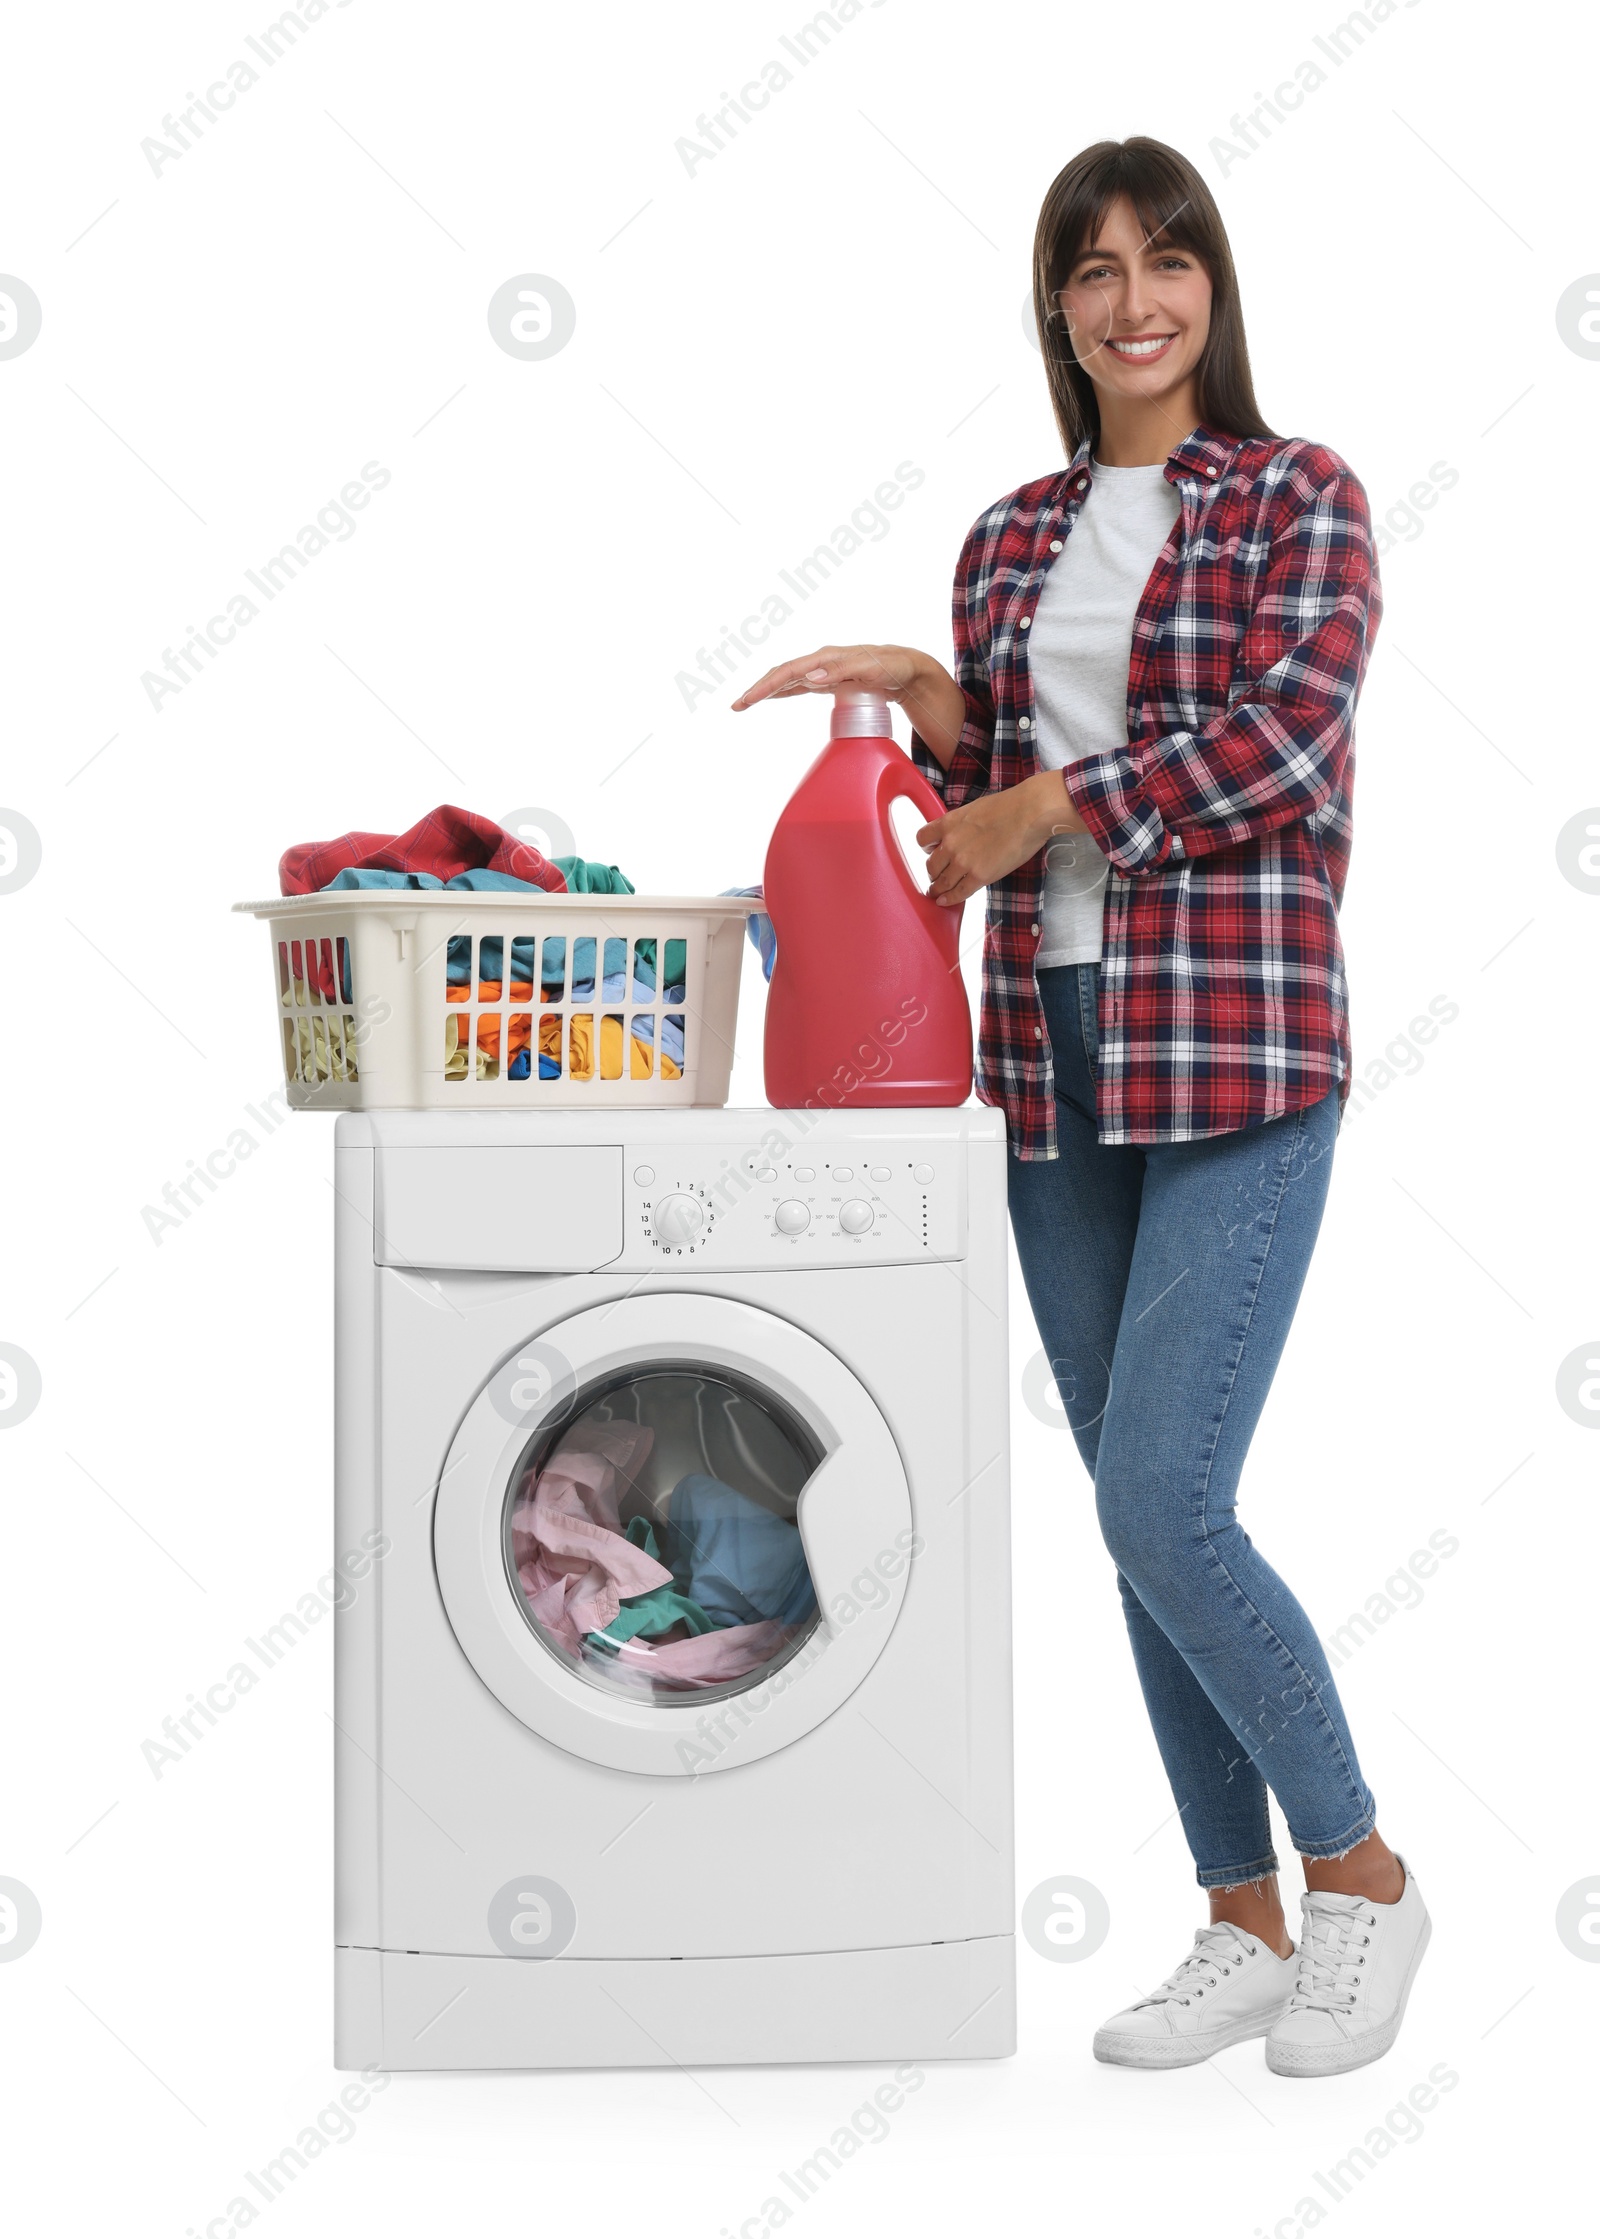 Photo of Beautiful woman with detergent and laundry basket on washing machine against white background